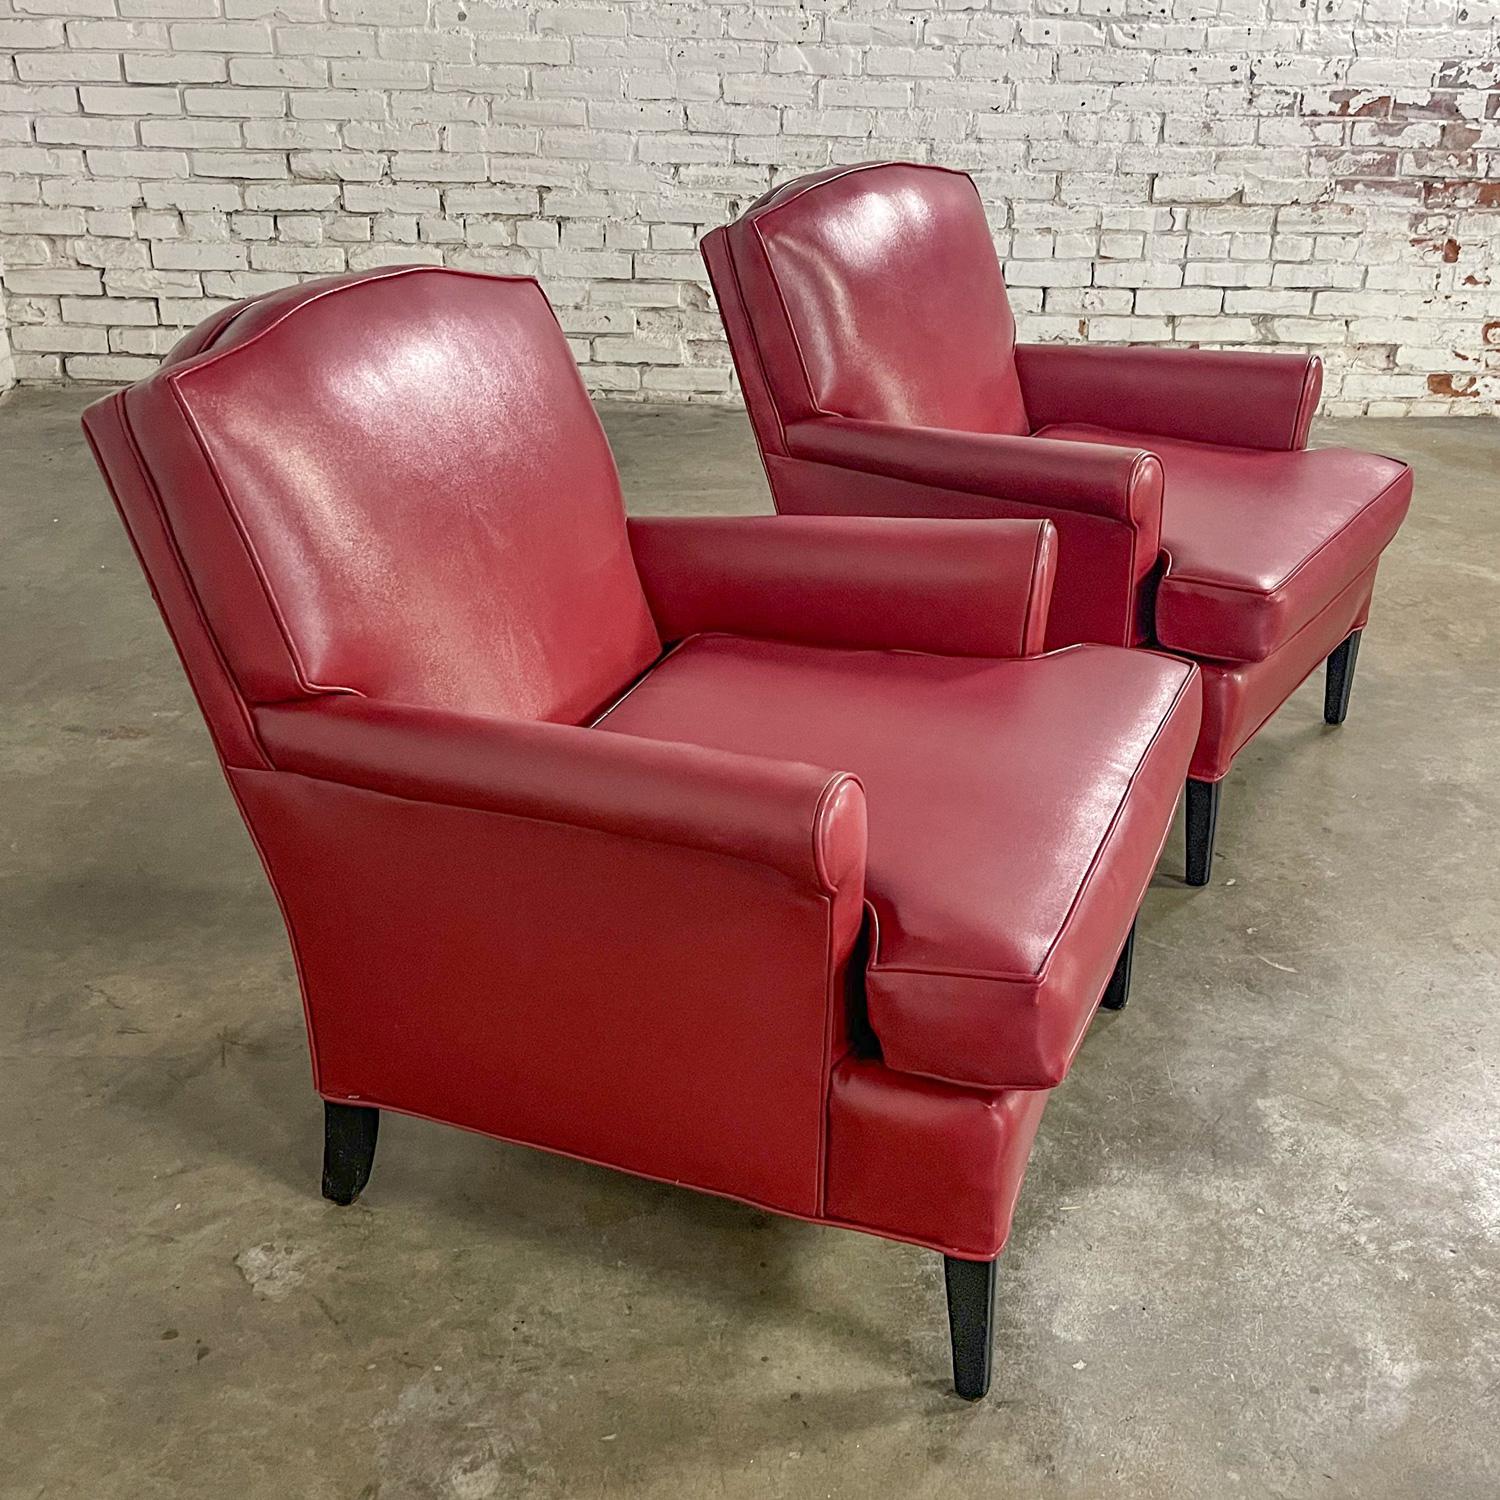 Unknown 1940’s Traditional Club Chairs Original Red Faux Leather & Wood Legs a Pair For Sale